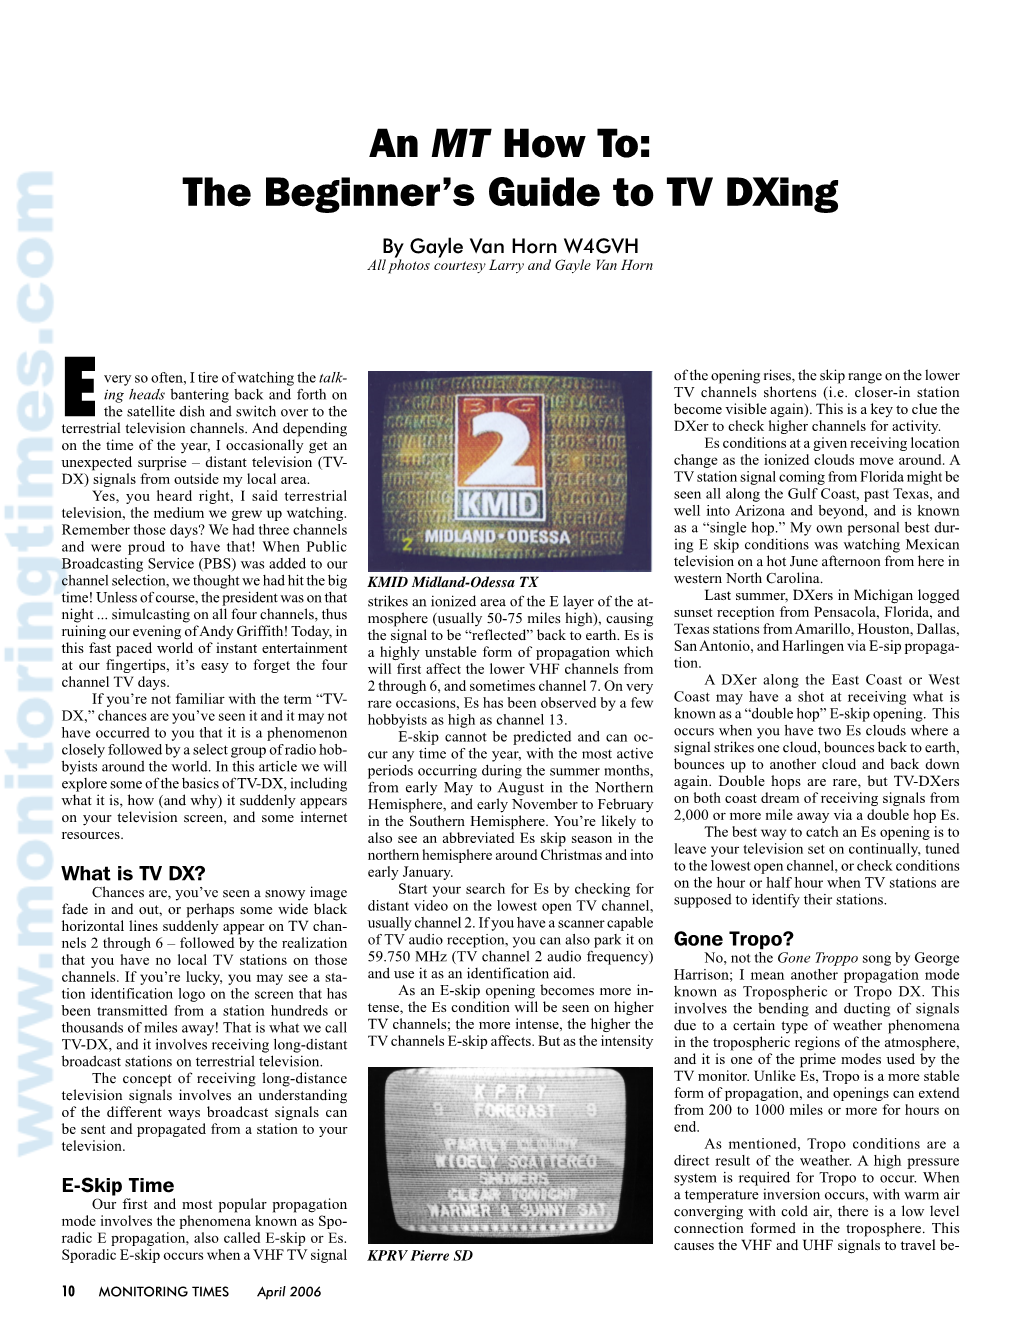 An MT How To: the Beginner's Guide to TV Dxing